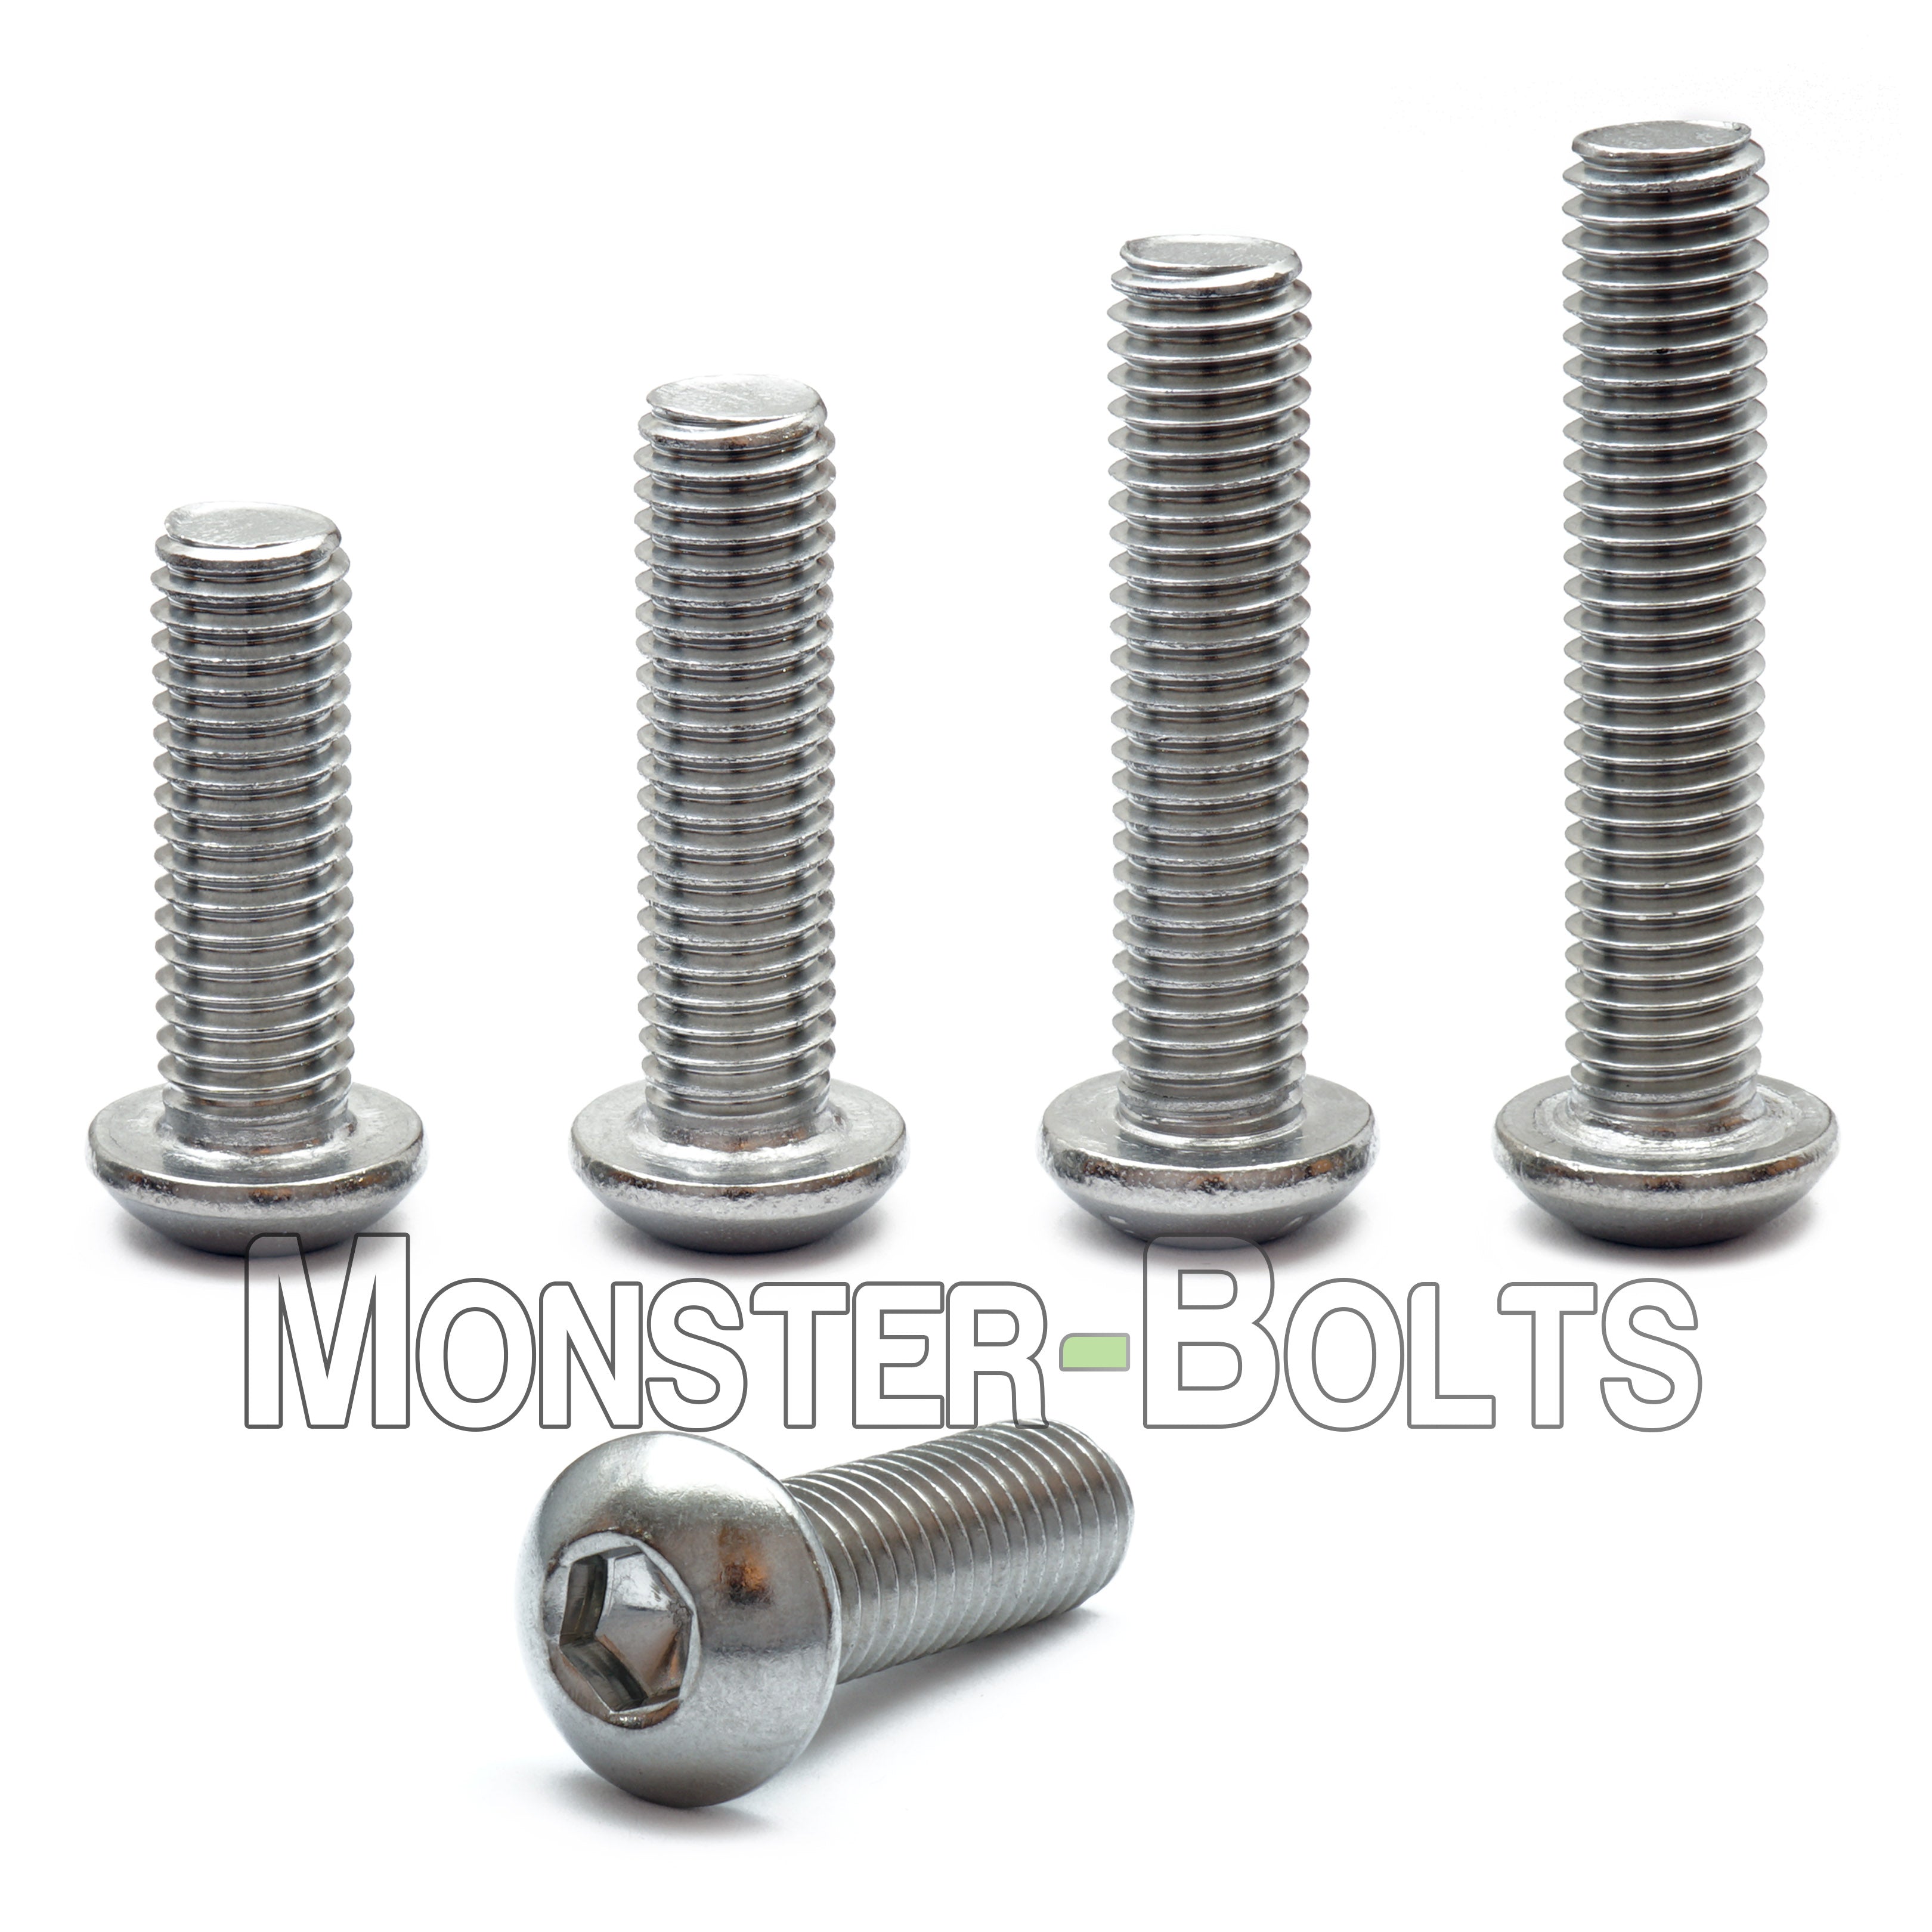 Qty 20 A2 Stainless Steel BUTTON HEAD Screws M6-1.0 x 35mm 6mm x 1.00 x 35mm 